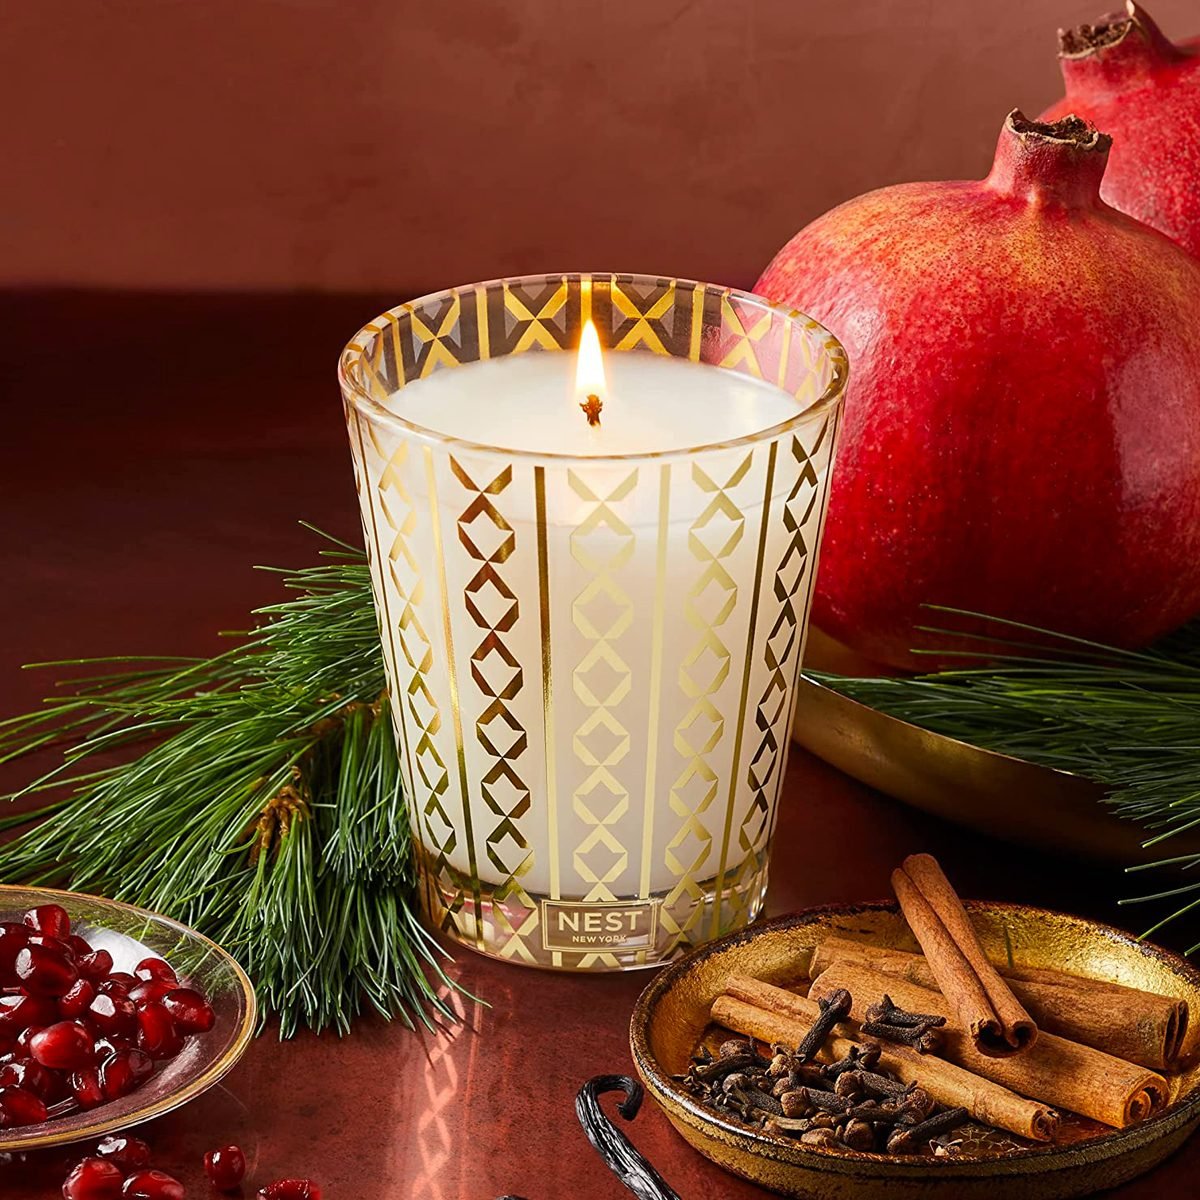 https://www.tasteofhome.com/wp-content/uploads/2022/09/NEST-Fragrances-Holiday-Scented-Classic-Candle-ecomm-amazon.com_.jpg